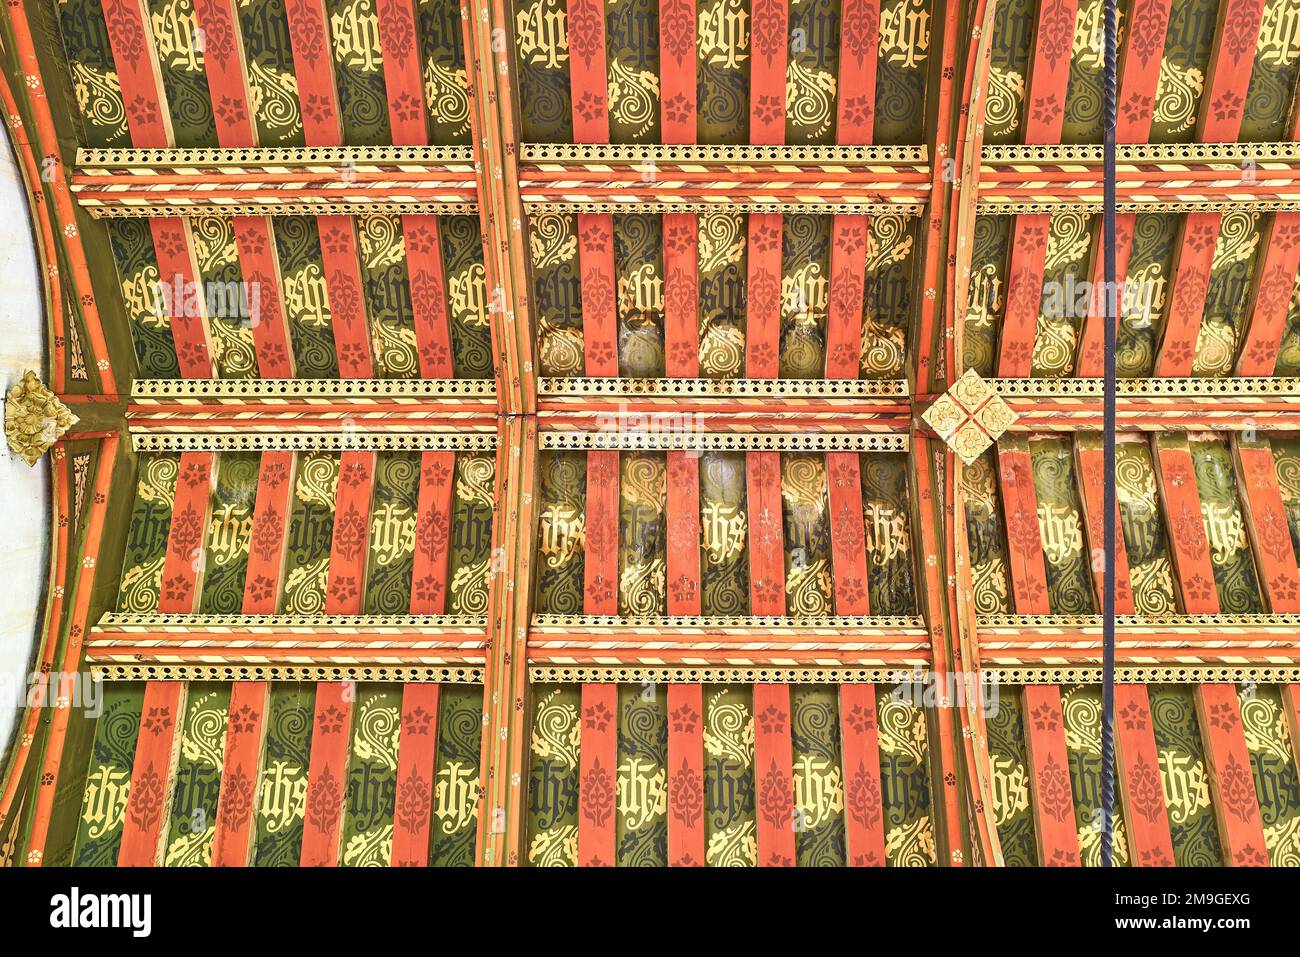 The monogram JHS or IHS on the painted wooden ceiling at the medieval fourteenth century christian church in the village of Wilbarston, England. Stock Photo